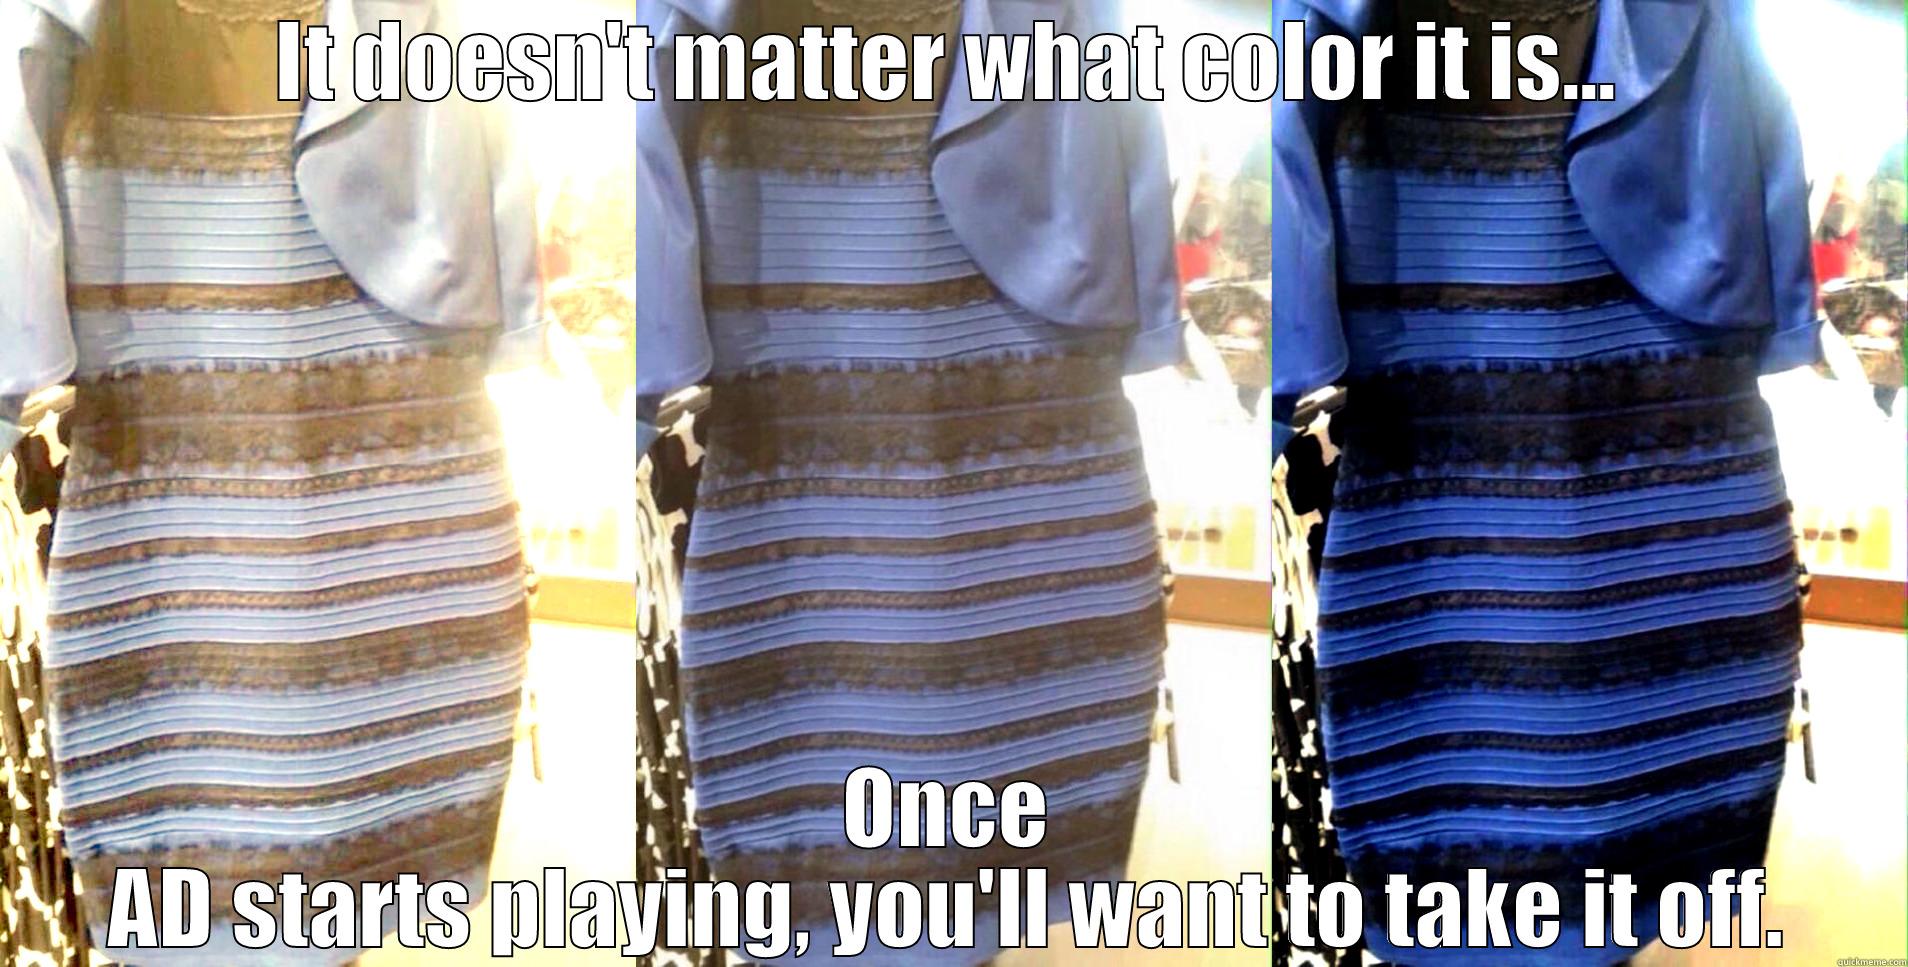 IT DOESN'T MATTER WHAT COLOR IT IS... ONCE AD STARTS PLAYING, YOU'LL WANT TO TAKE IT OFF. Misc